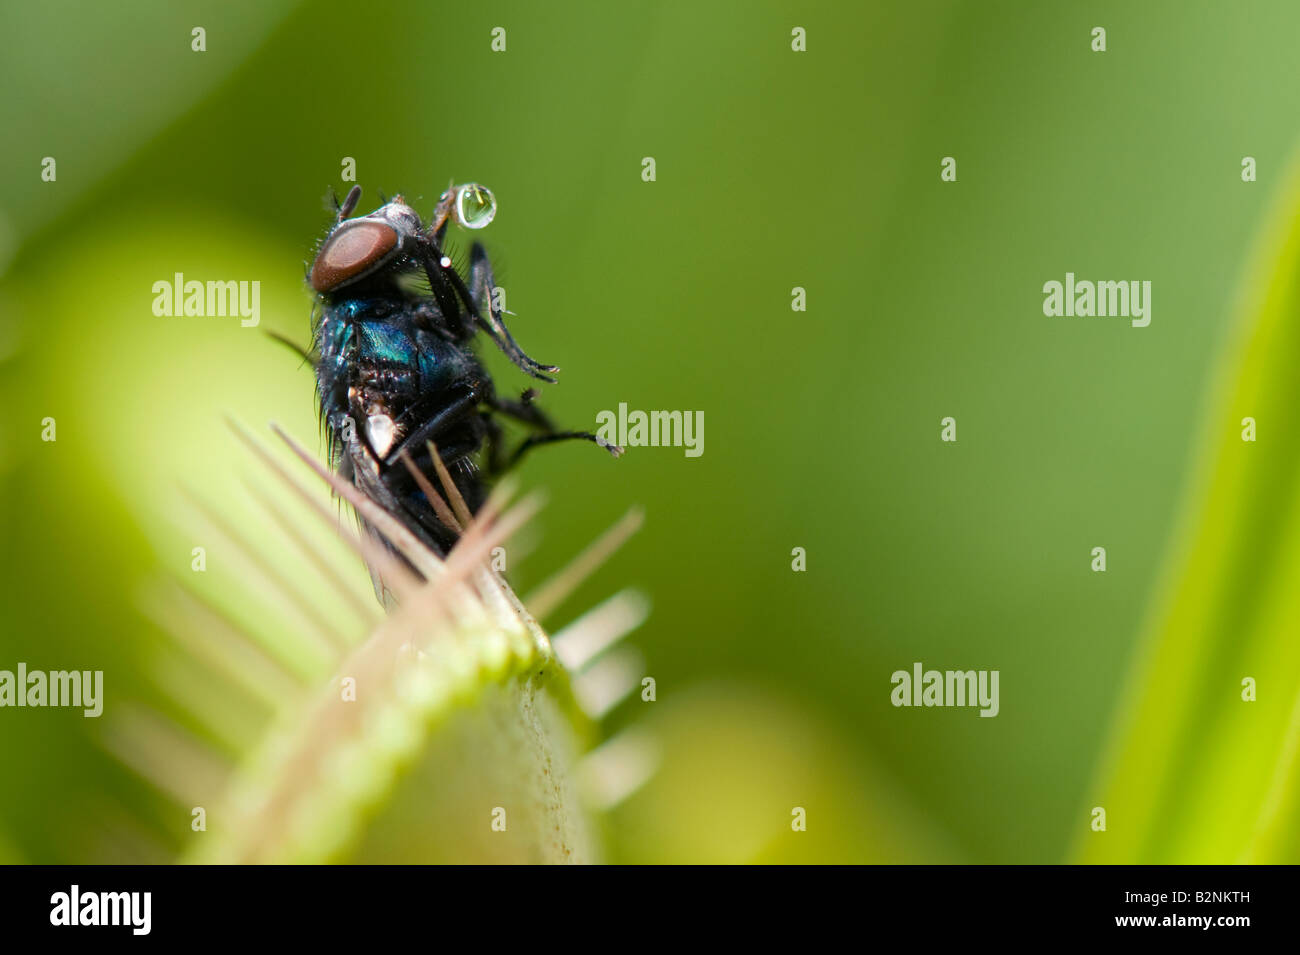 Decomposed housefly inside an opening venus fly trap - Stock Image -  C056/8561 - Science Photo Library